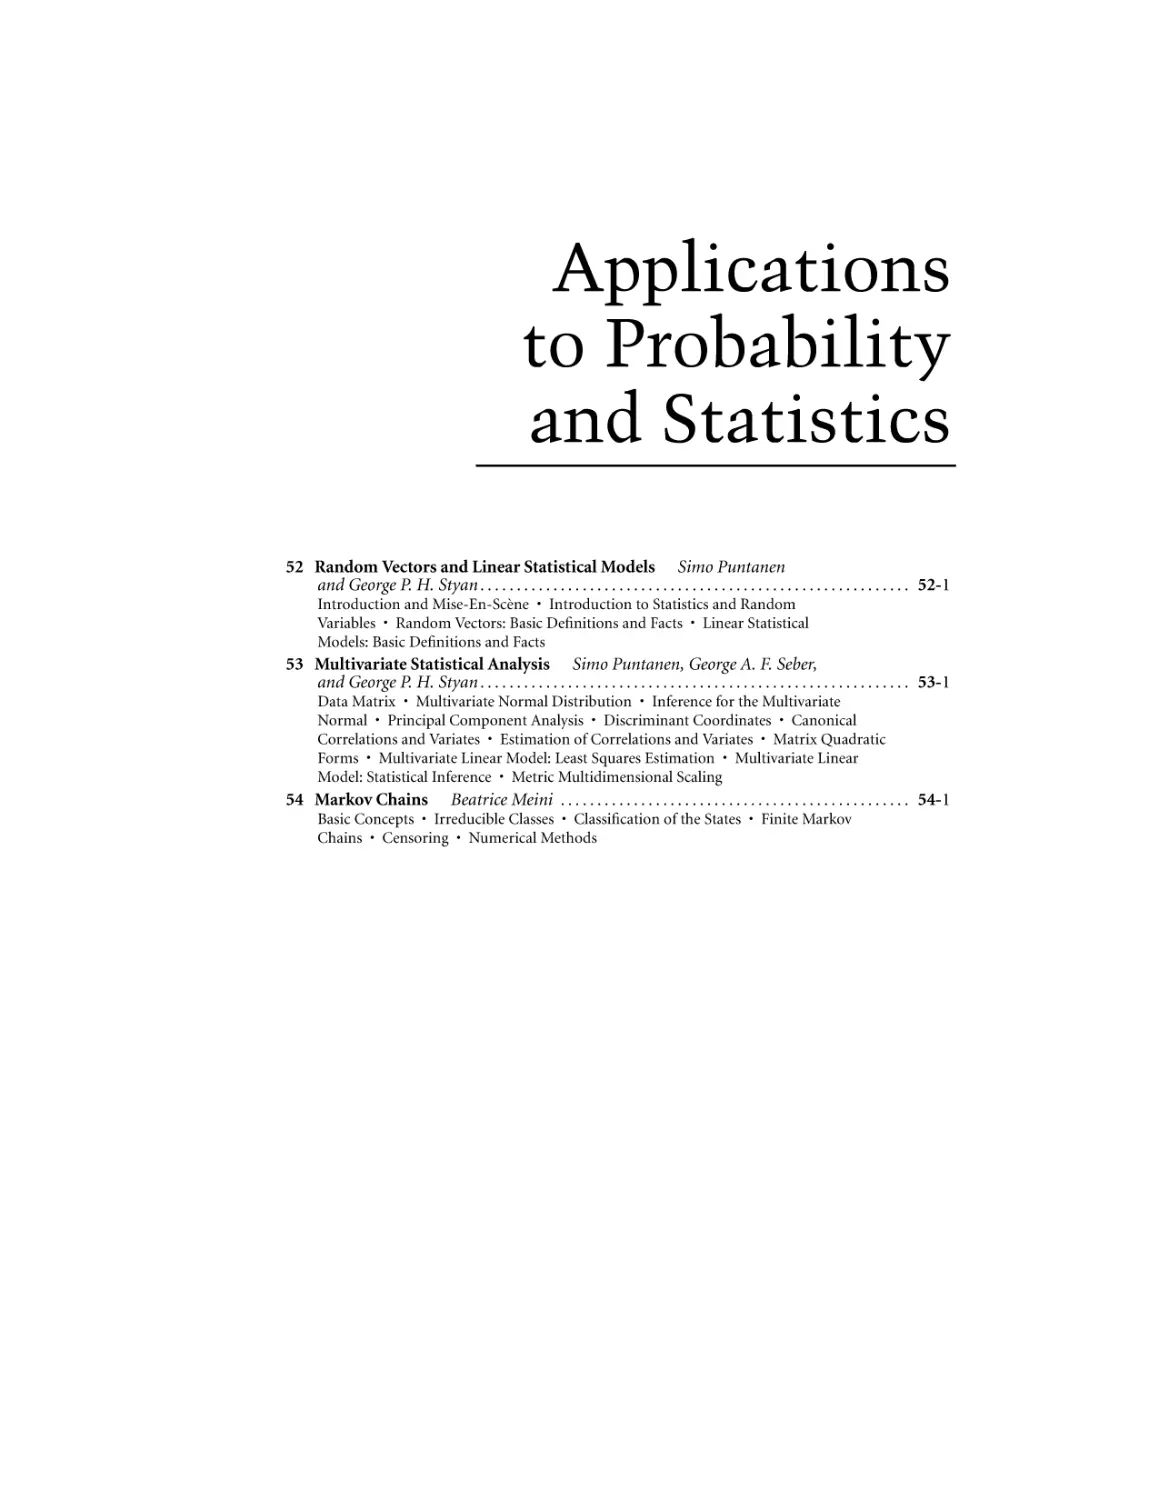 Applications to Probability and Statistics